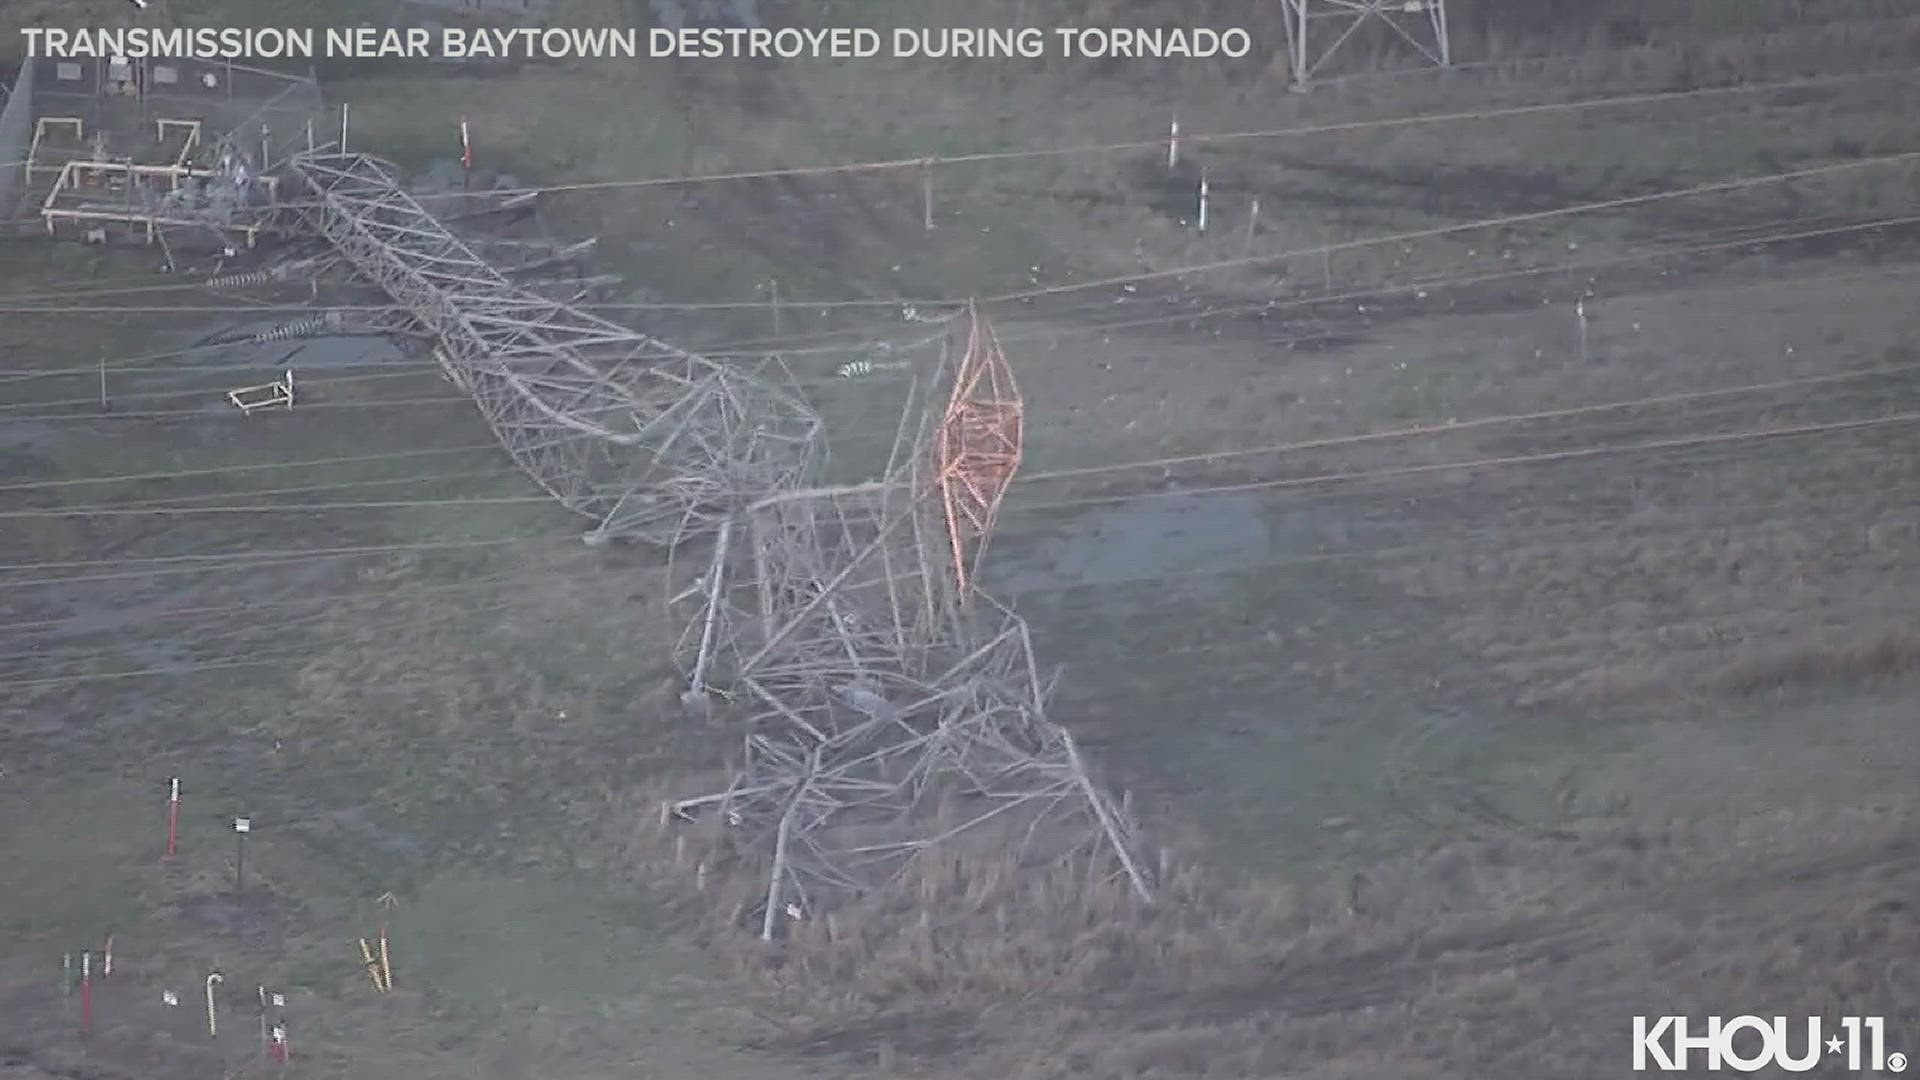 A transmission was destroyed near Baytown on Tuesday, Jan. 24 during severe weather.